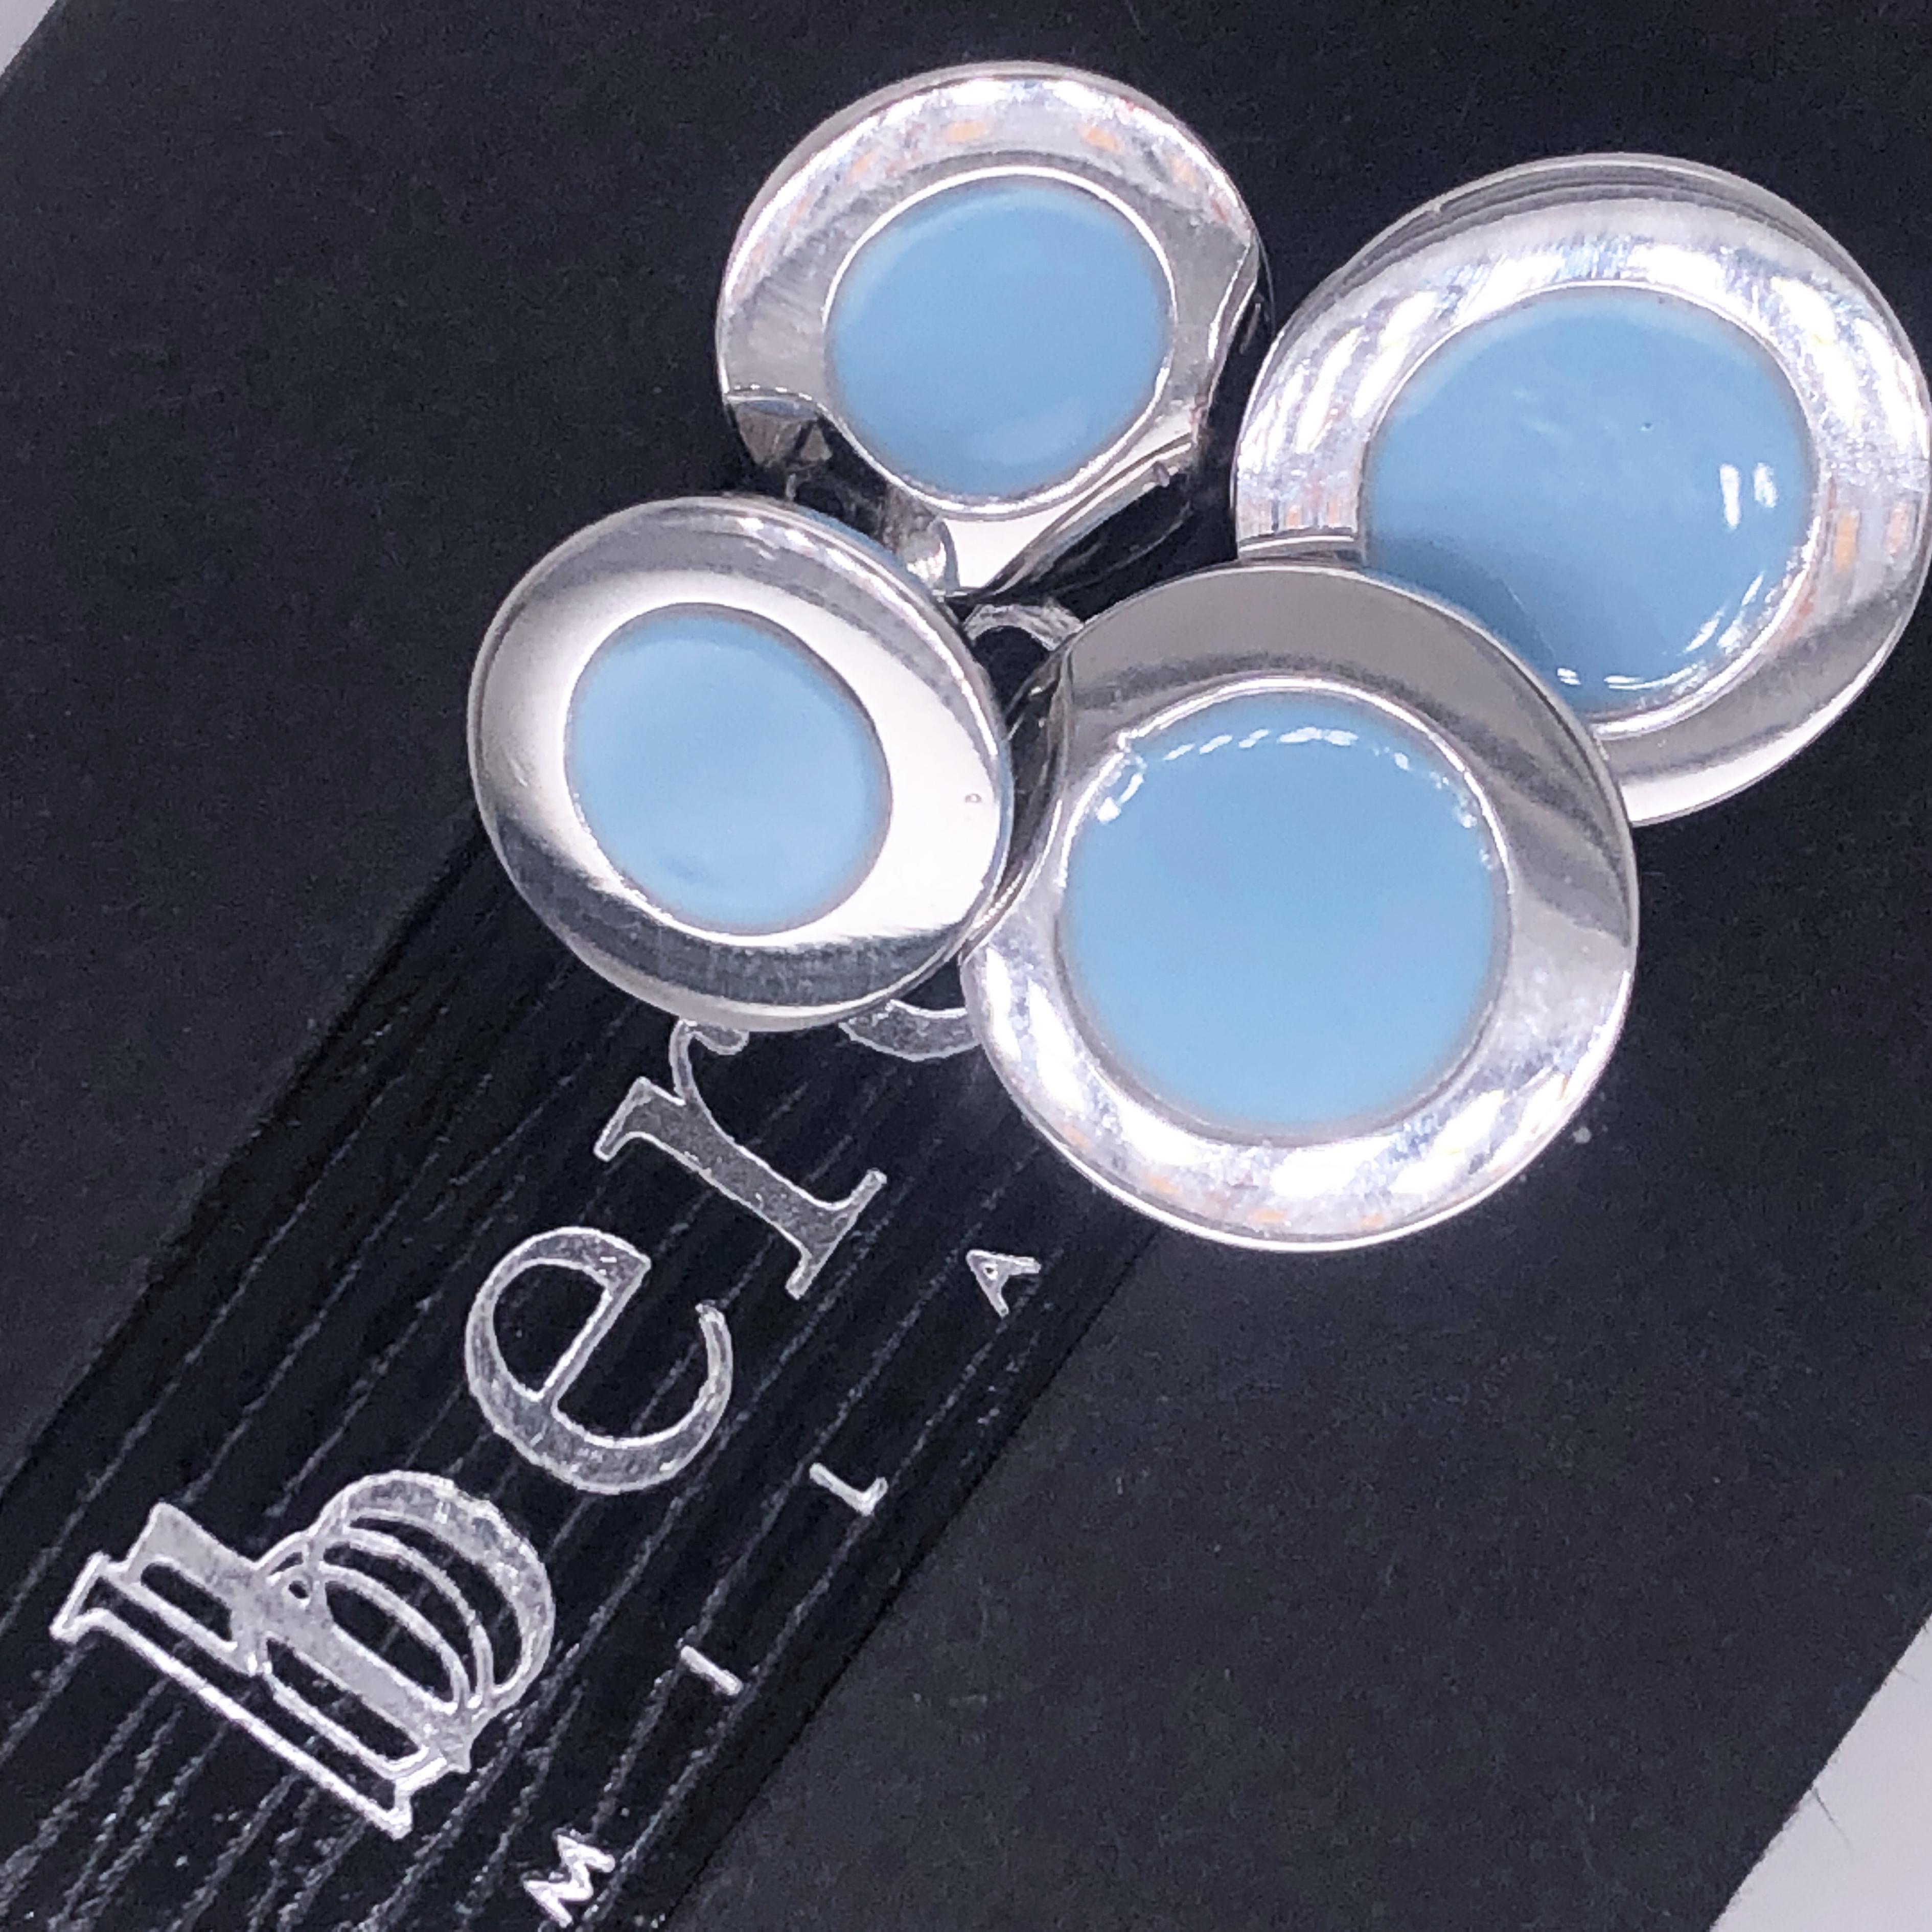 Chic yet Timeless Round, Mirror Finish, Pastel Blue Hand Enamelled Sterling Silver Cufflinks.

In our Smart Black Box and Pouch.

Front Diameter about 0.633 inches.